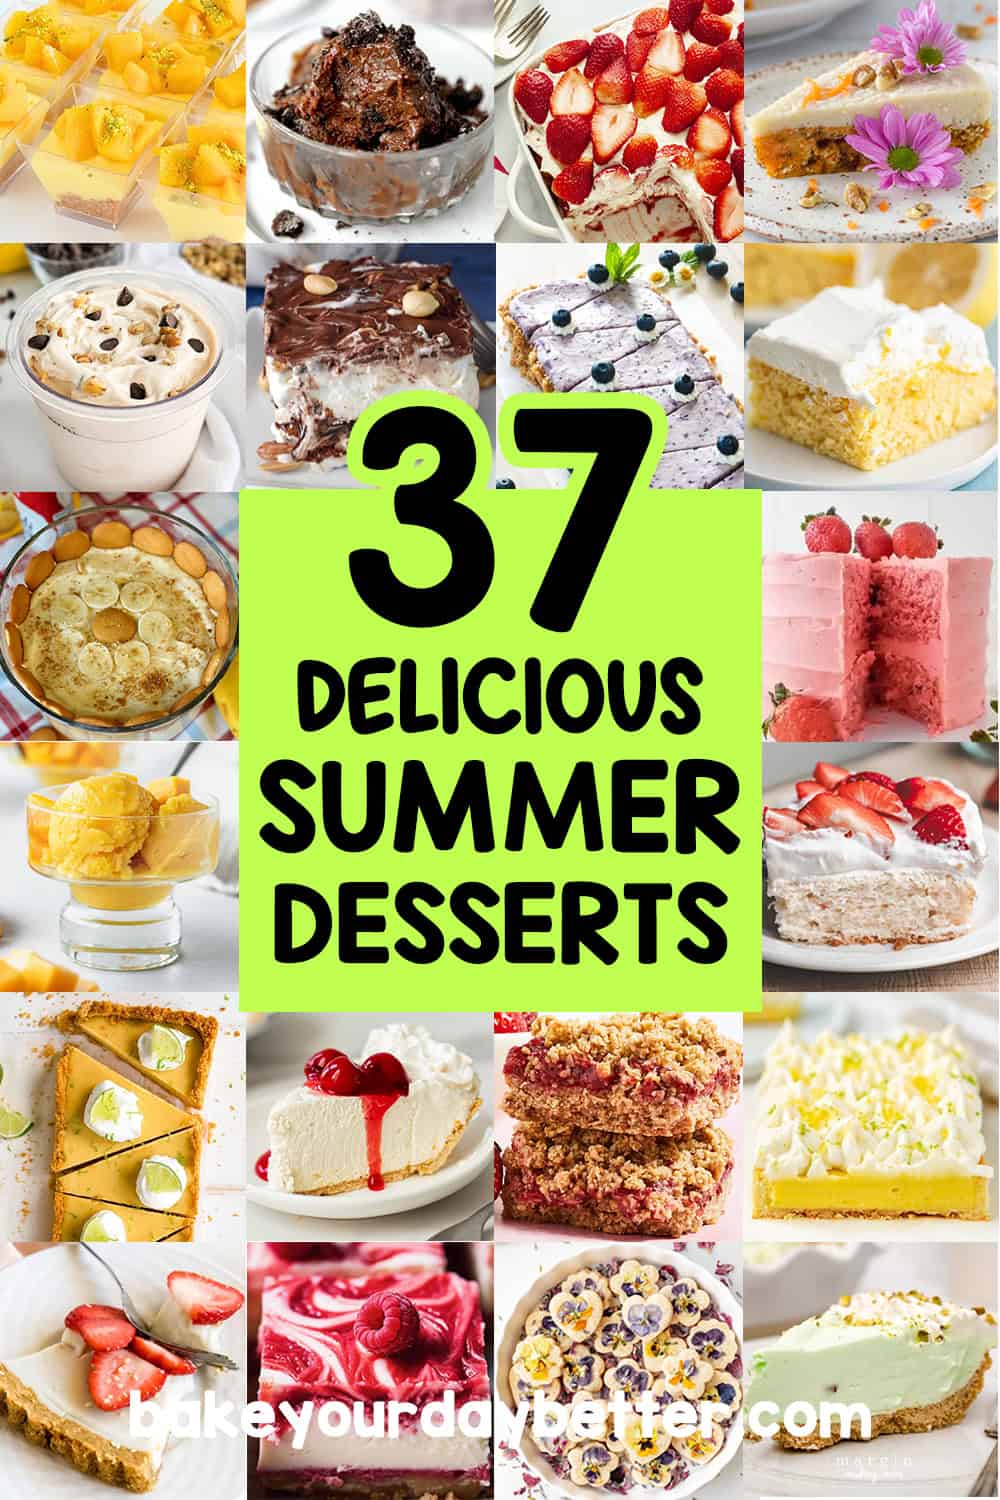 pictures of summer desserts with text overlay that says: 37 delicious summer desserts